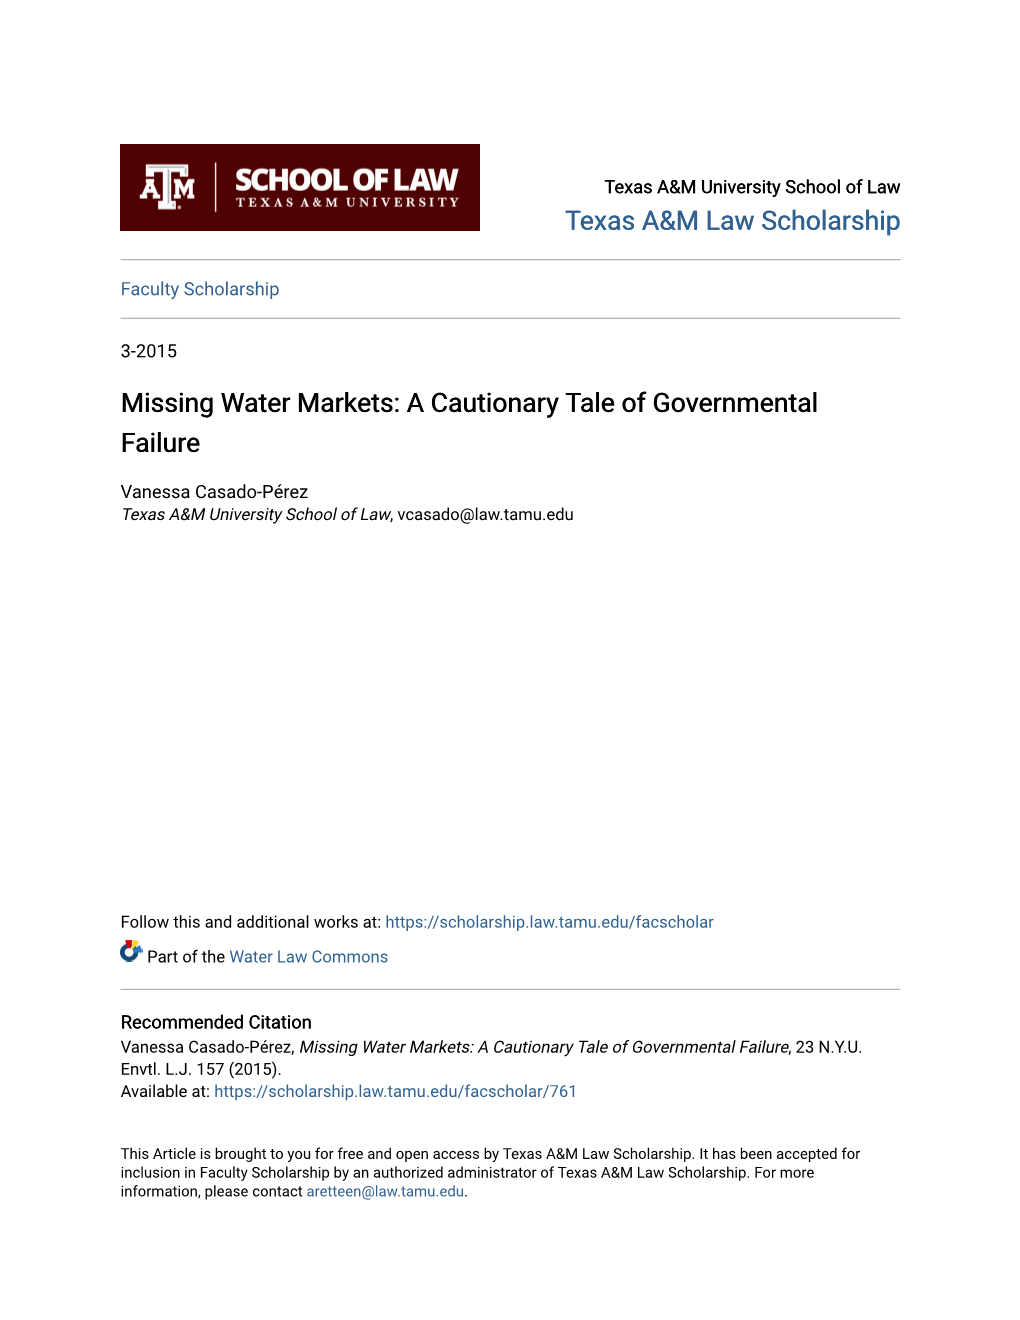 Missing Water Markets: a Cautionary Tale of Governmental Failure